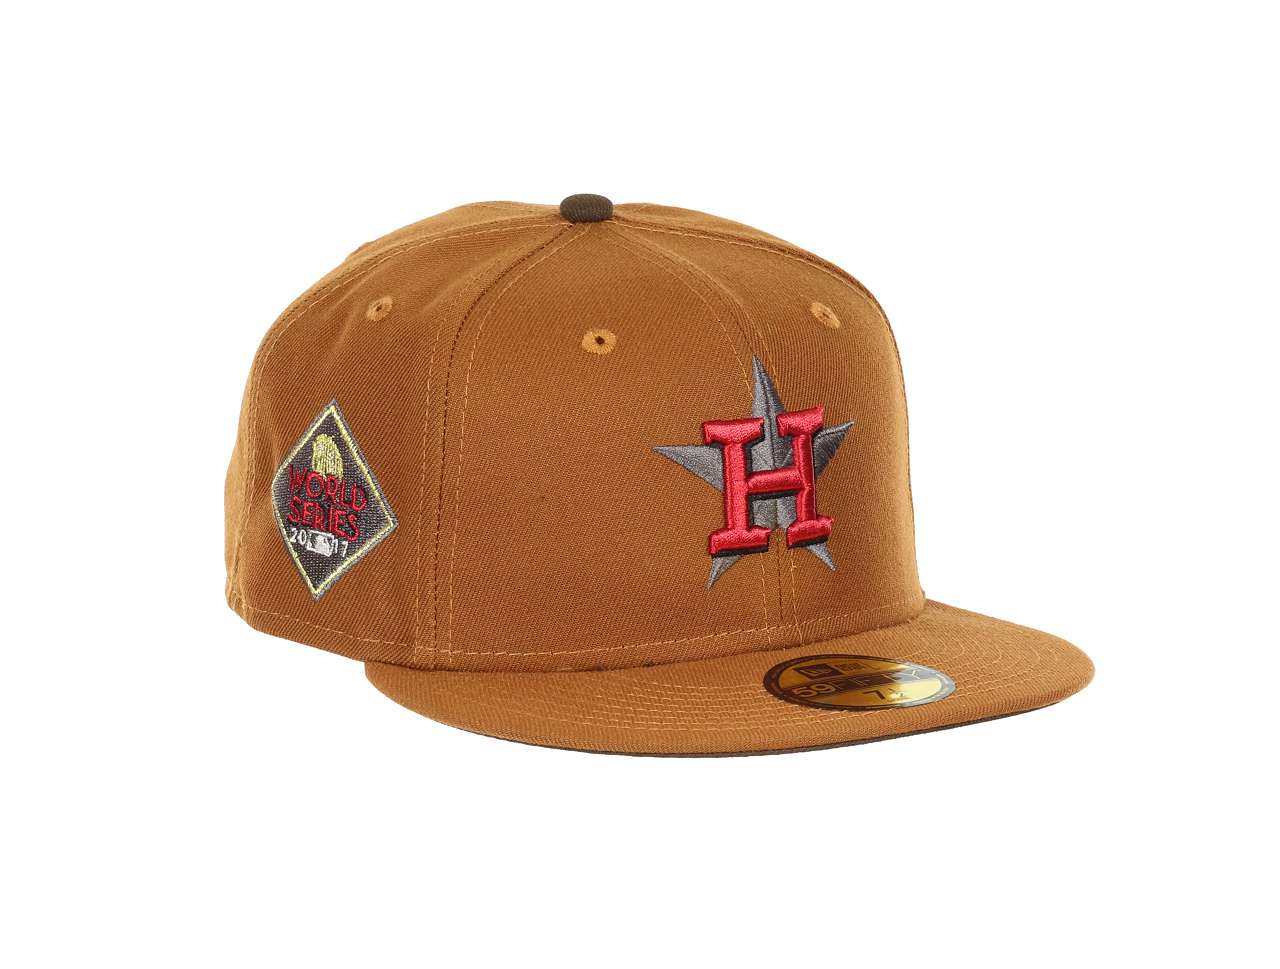 Houston Astros  MLB Cooperstown World Series 2017 Sidepatch Toasted Peanut 59Fifty Basecap New Era